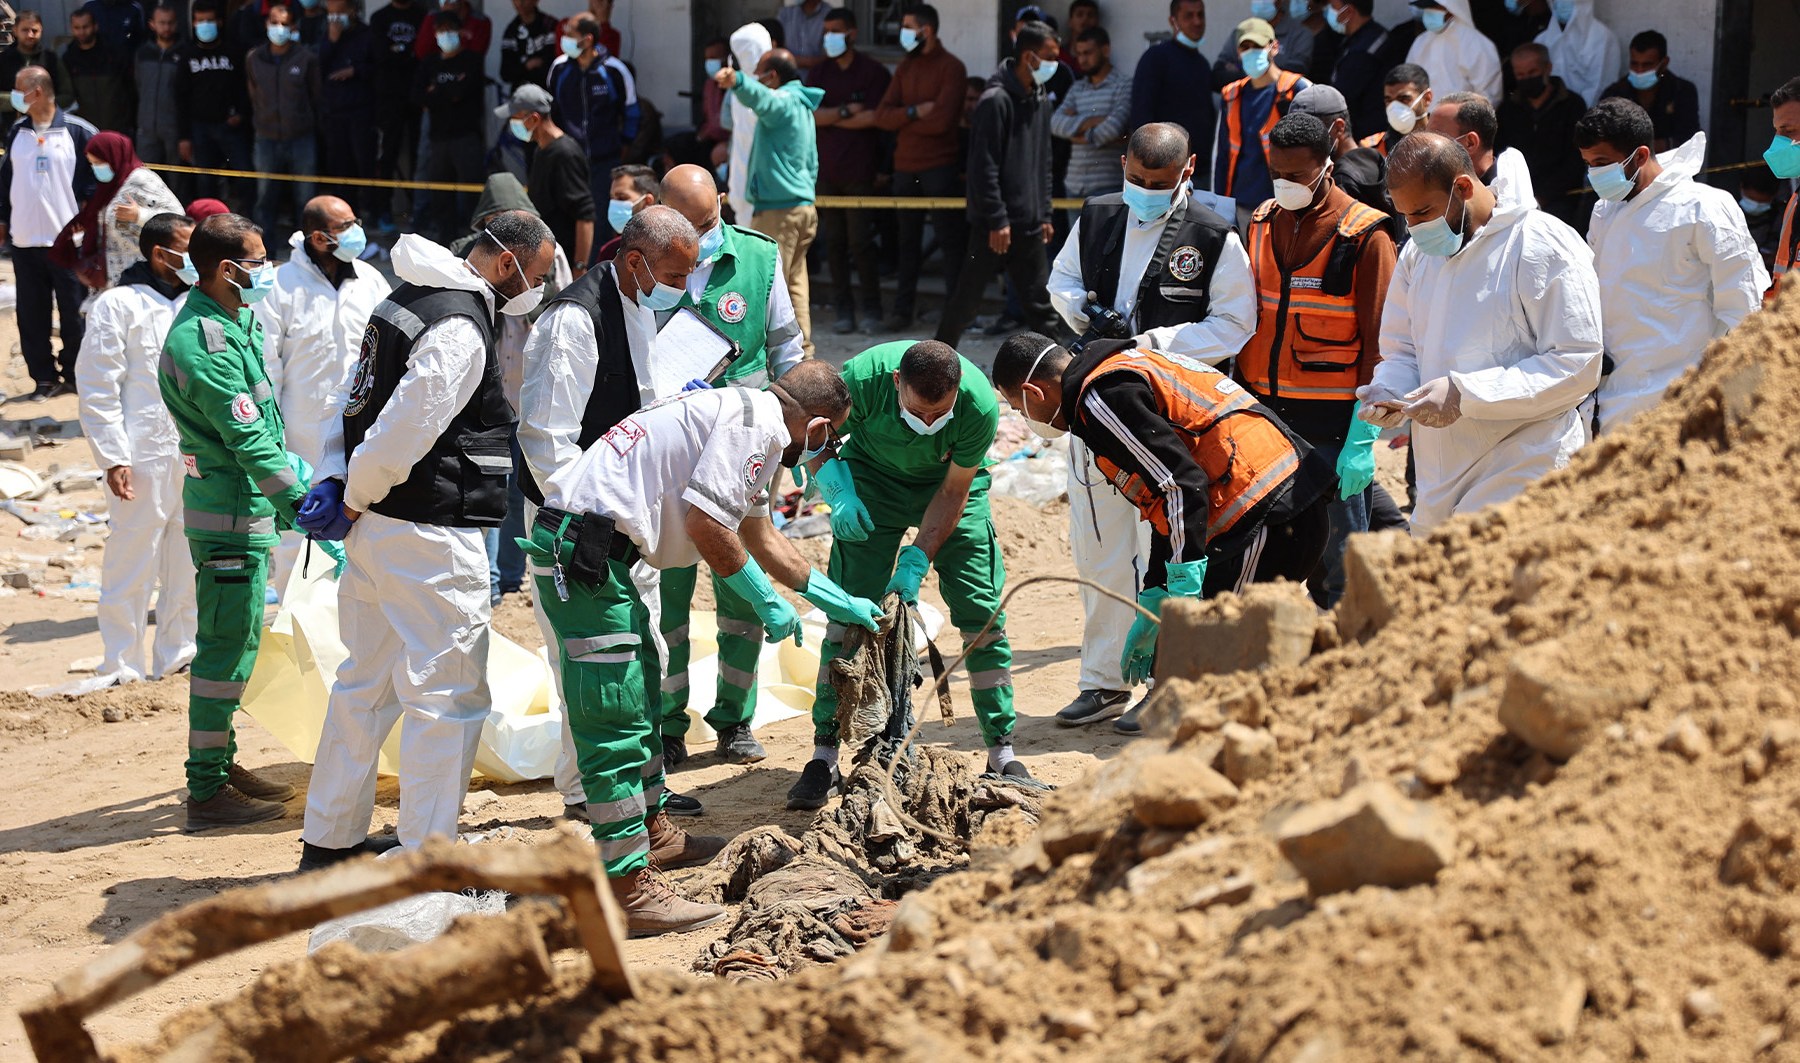 Mass grave discovered at Gaza hospital occupied by Israeli forces | Gaza [Video]